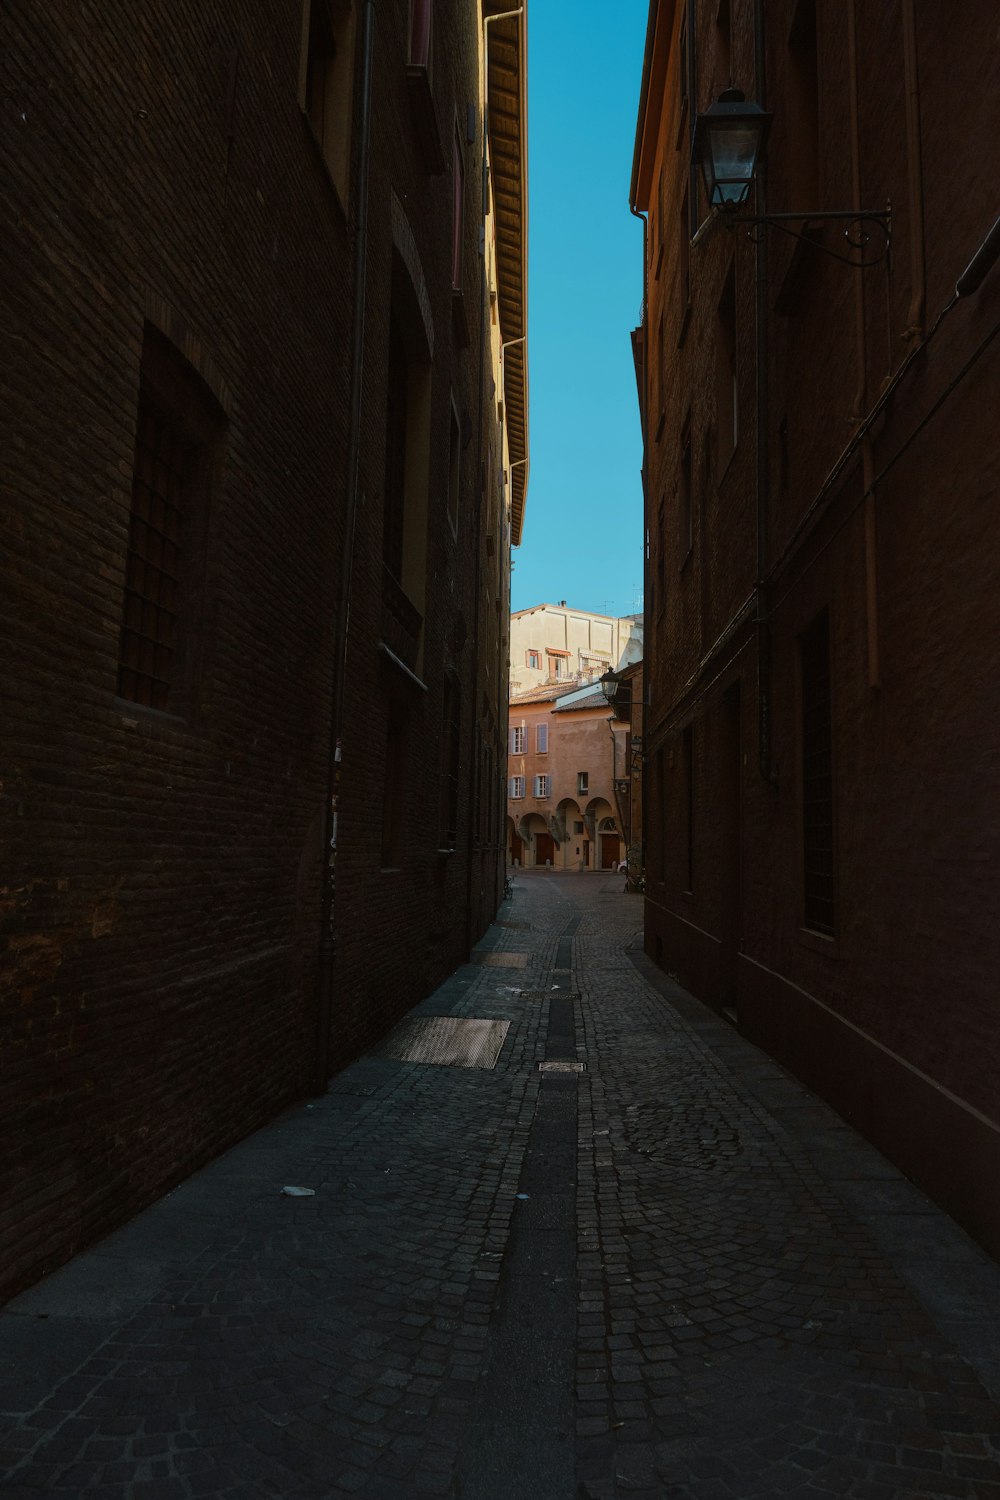 a narrow alley way with brick buildings on both sides